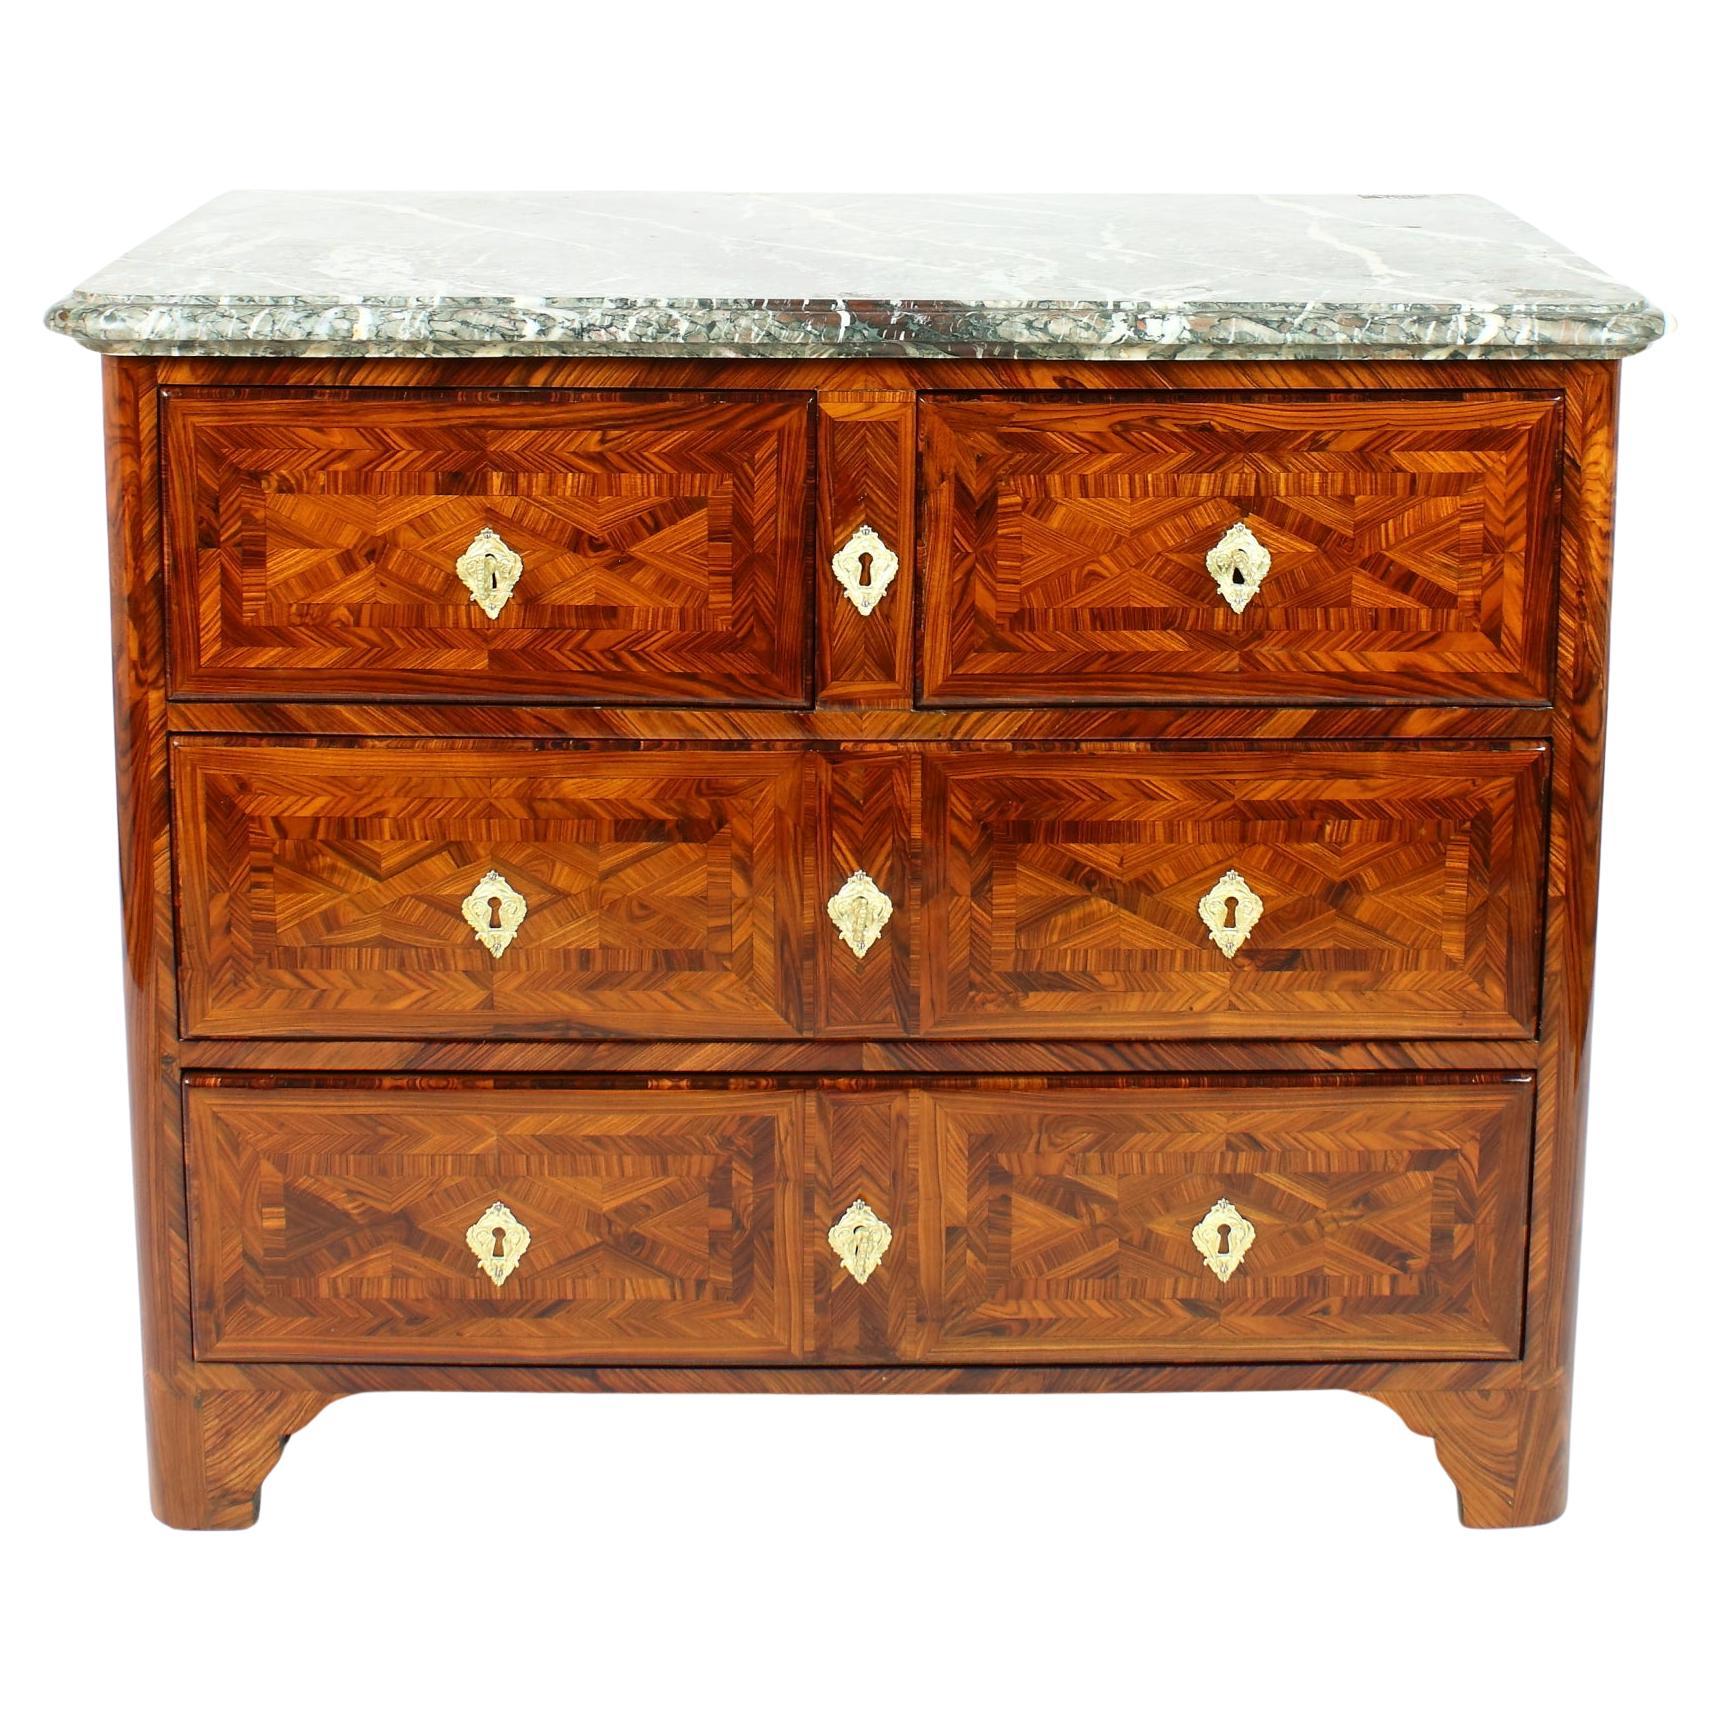 Early 18th Century French Louis XIV/Régence Period Trellis Marquetry Commode For Sale